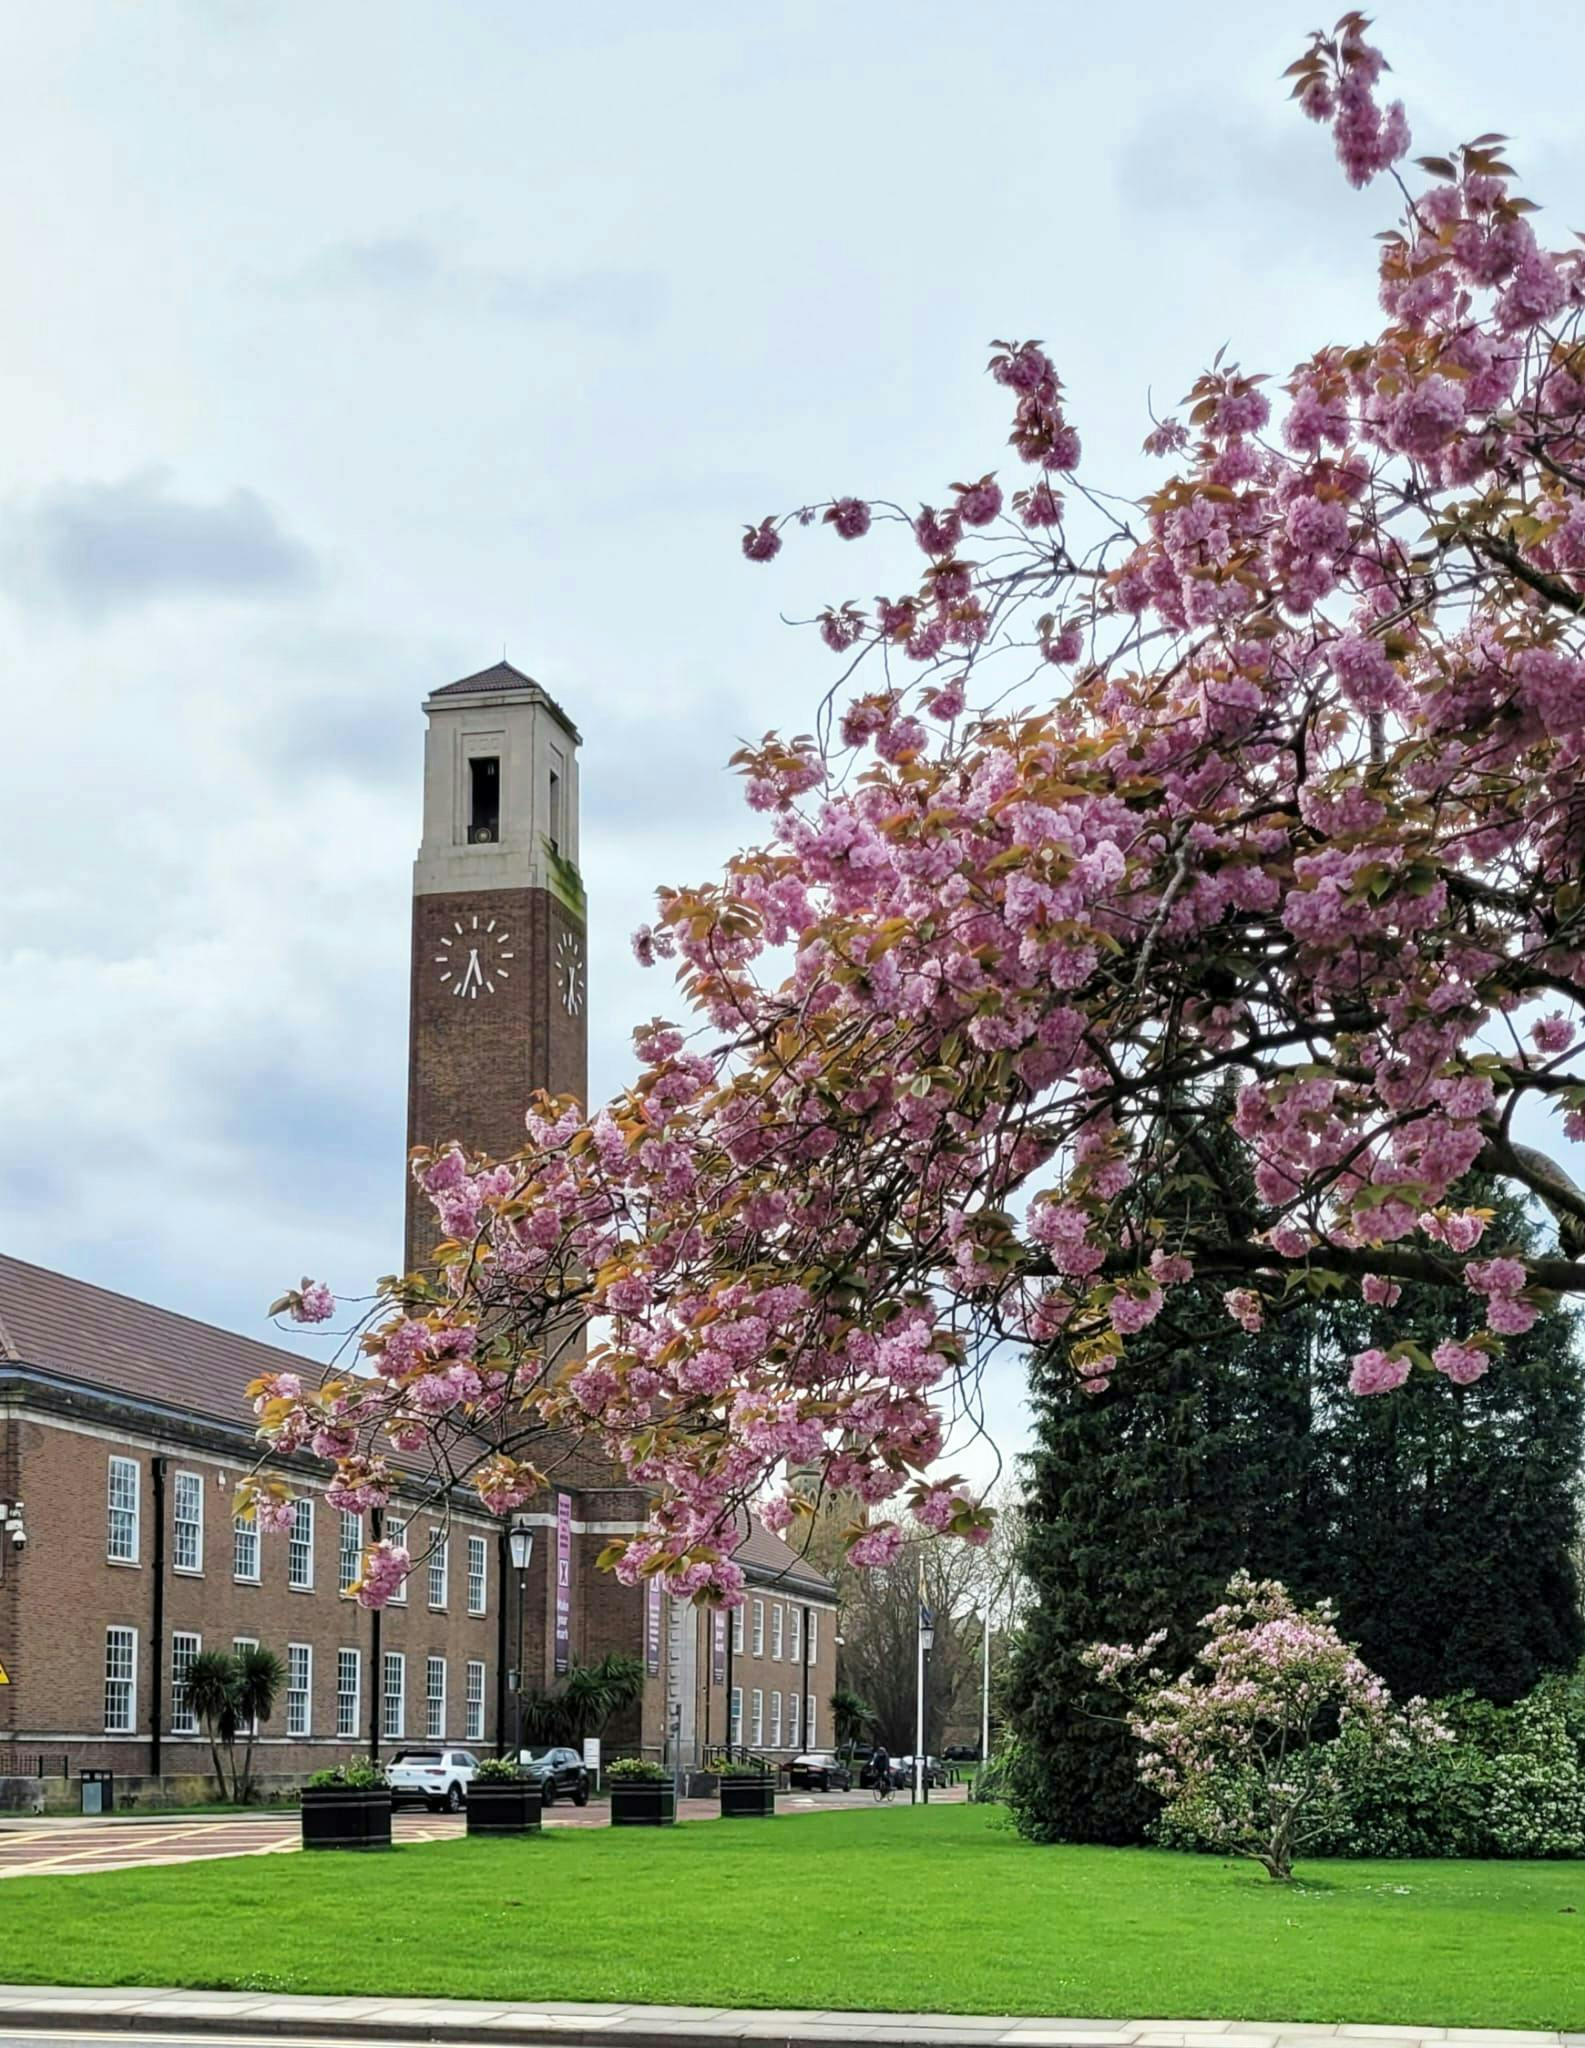 Image of the Civic Center of Salford with a blossoming tree in the foreground